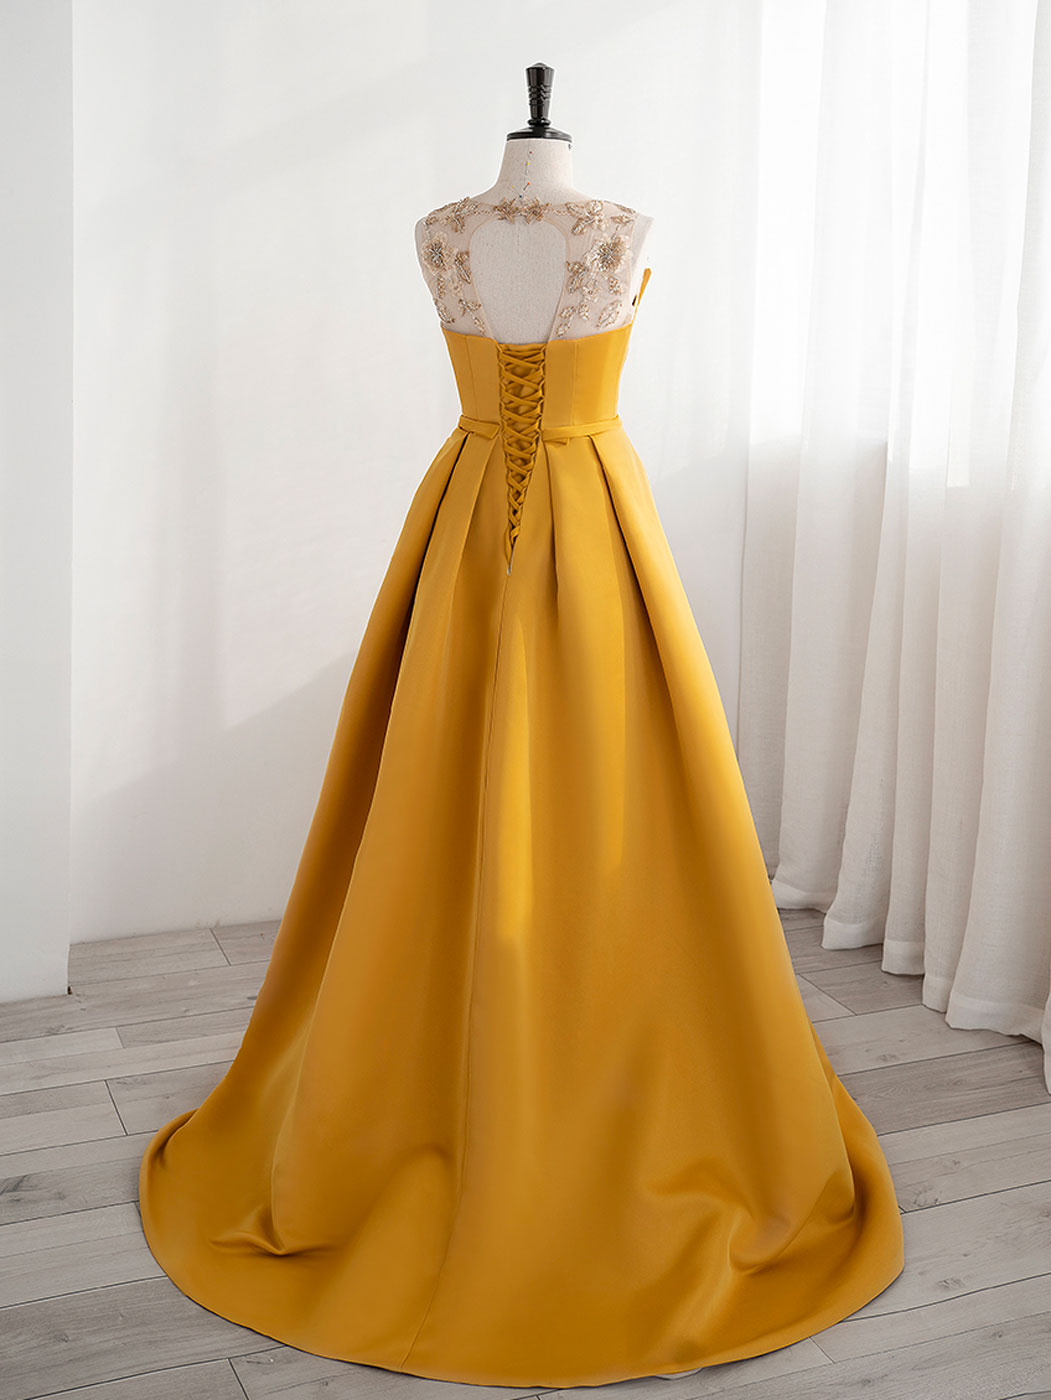 Yellow One Shoulder Mustard Yellow Cocktail Dress With Ruched Detailing And  Back Zipper Perfect For Evening Parties And Proms From Queenshoebox, $80.04  | DHgate.Com